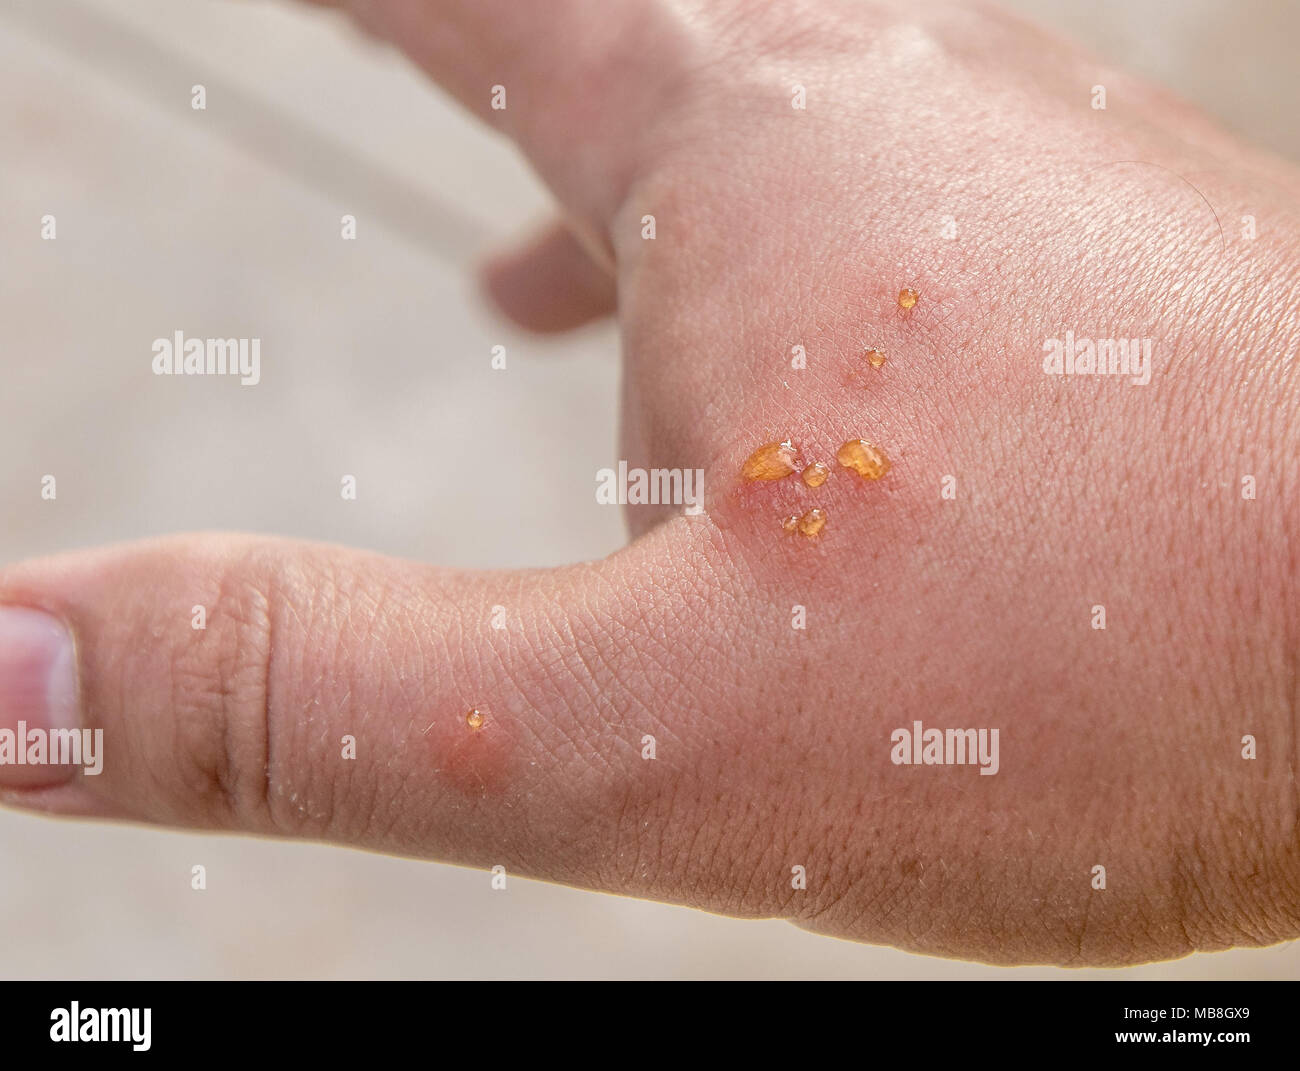 Man's hand with puss coming out of bites inflicted by some tropical insects. Stock Photo